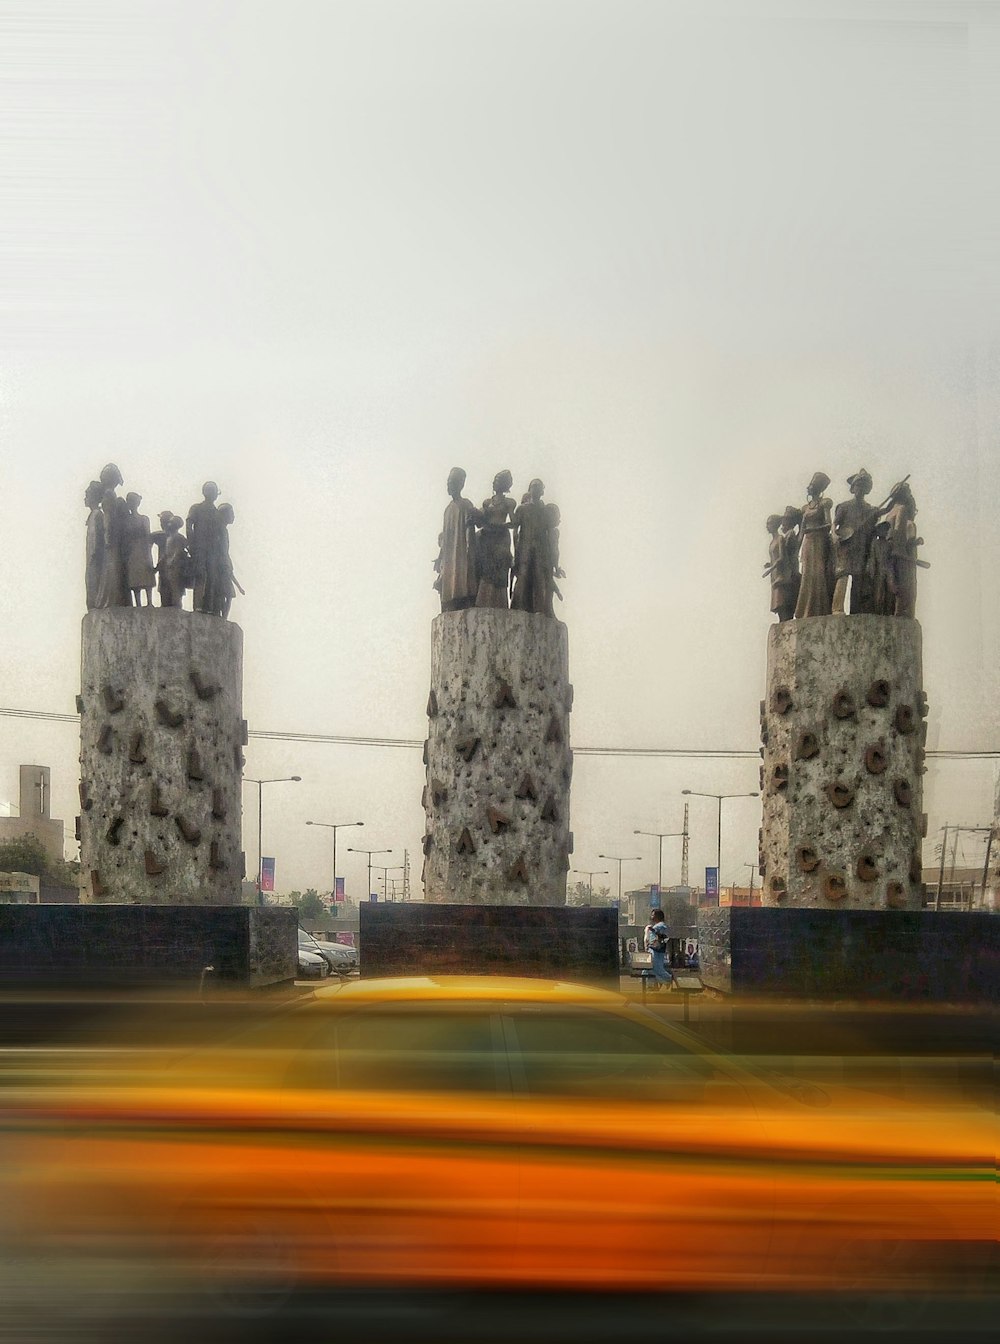 a blurry photo of a car passing by a monument